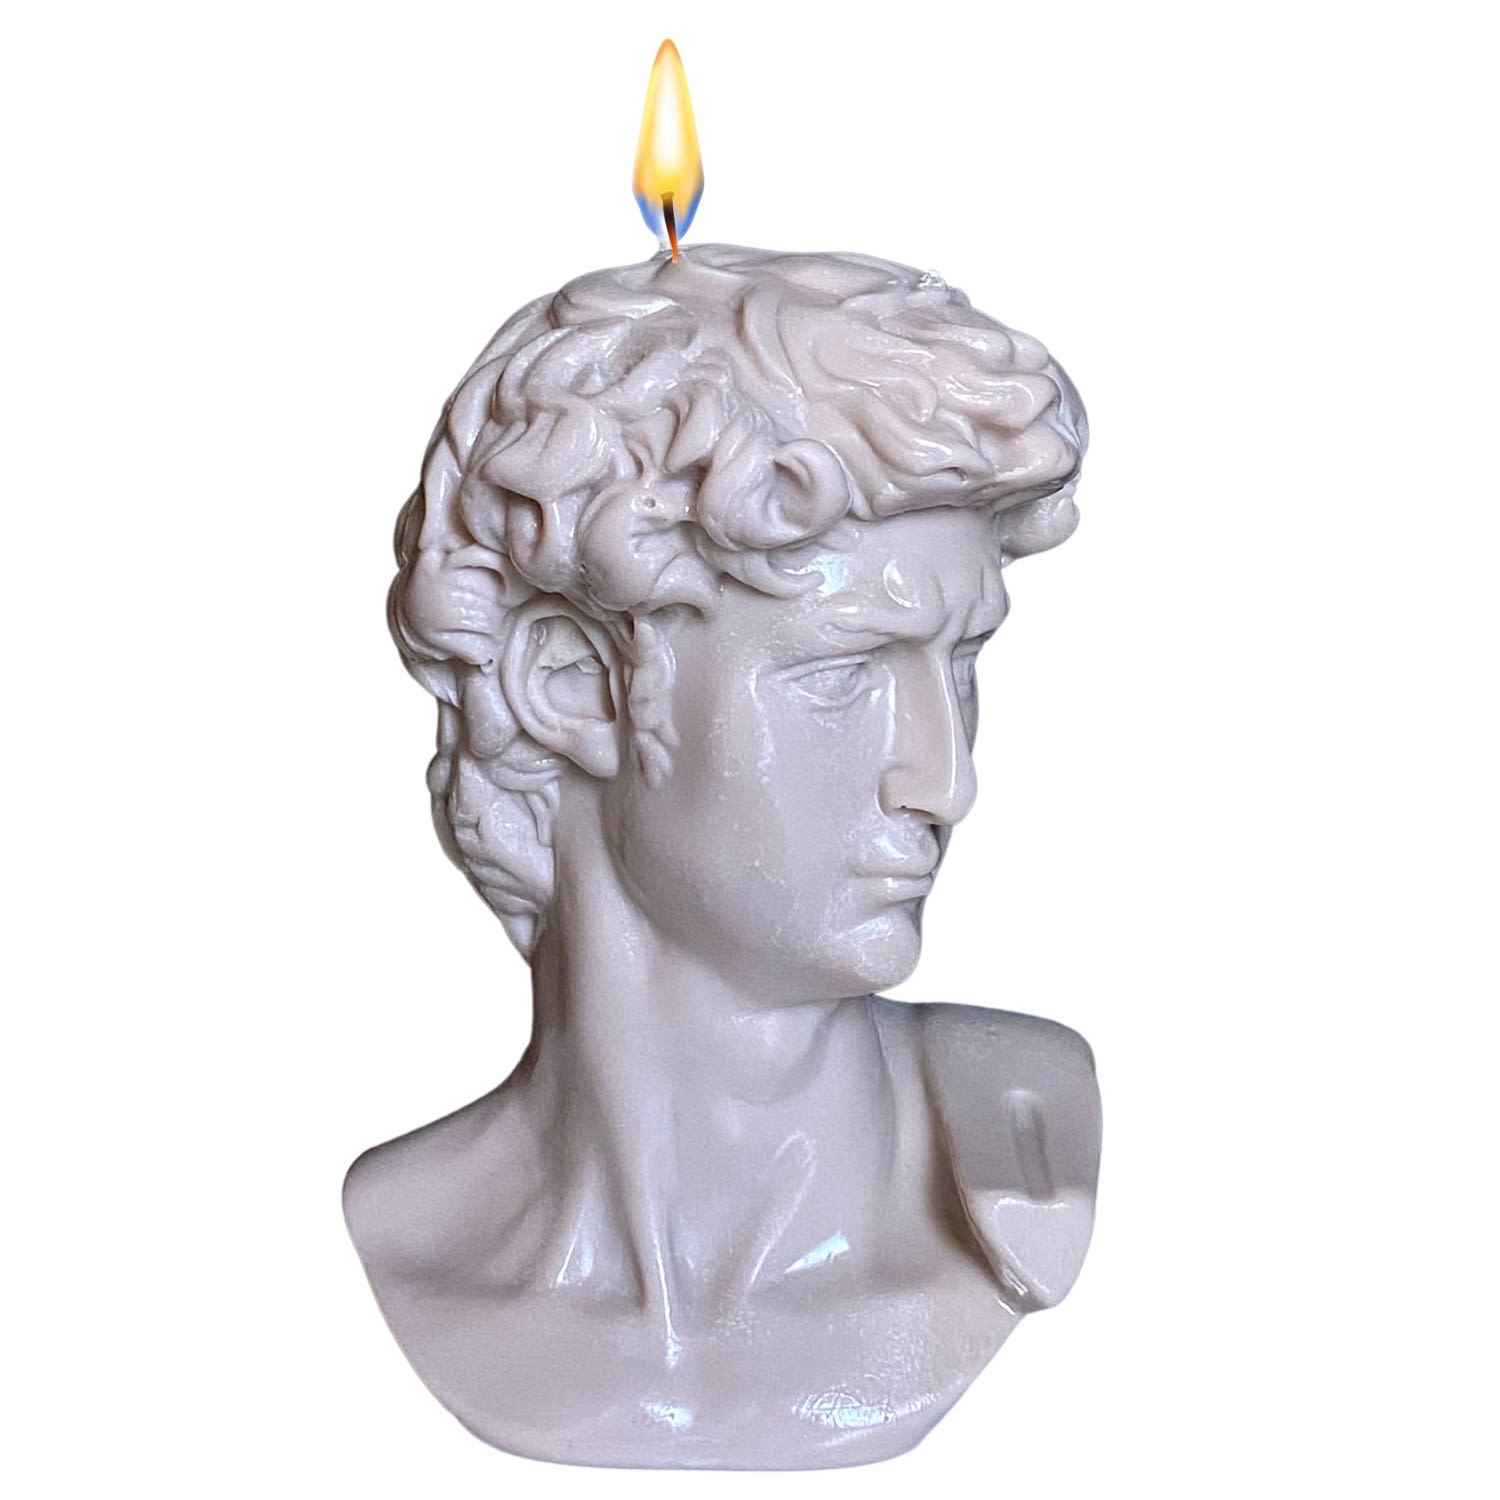 Neos Candlestudio David Bust Candle - Neutrals